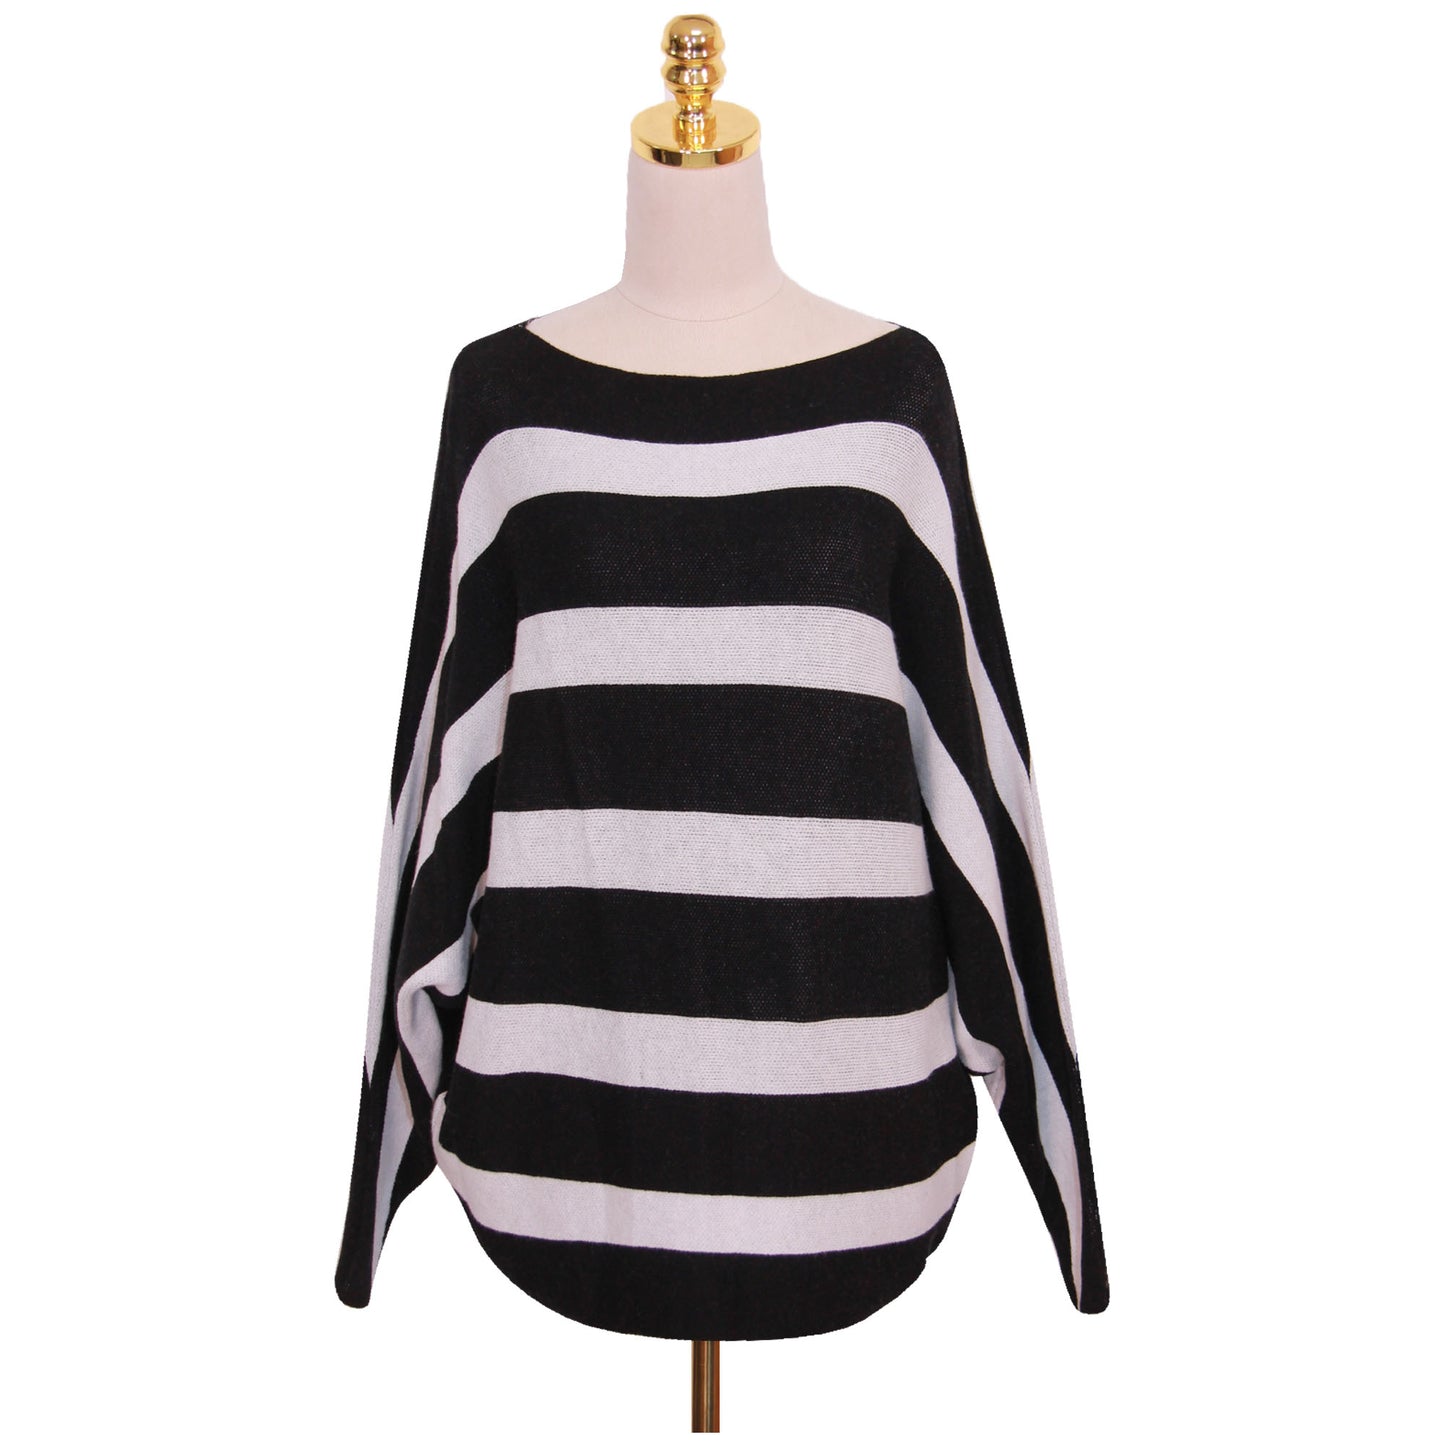 CozyChic Striped Women's Winter Jumper – Perfect Gift for Her